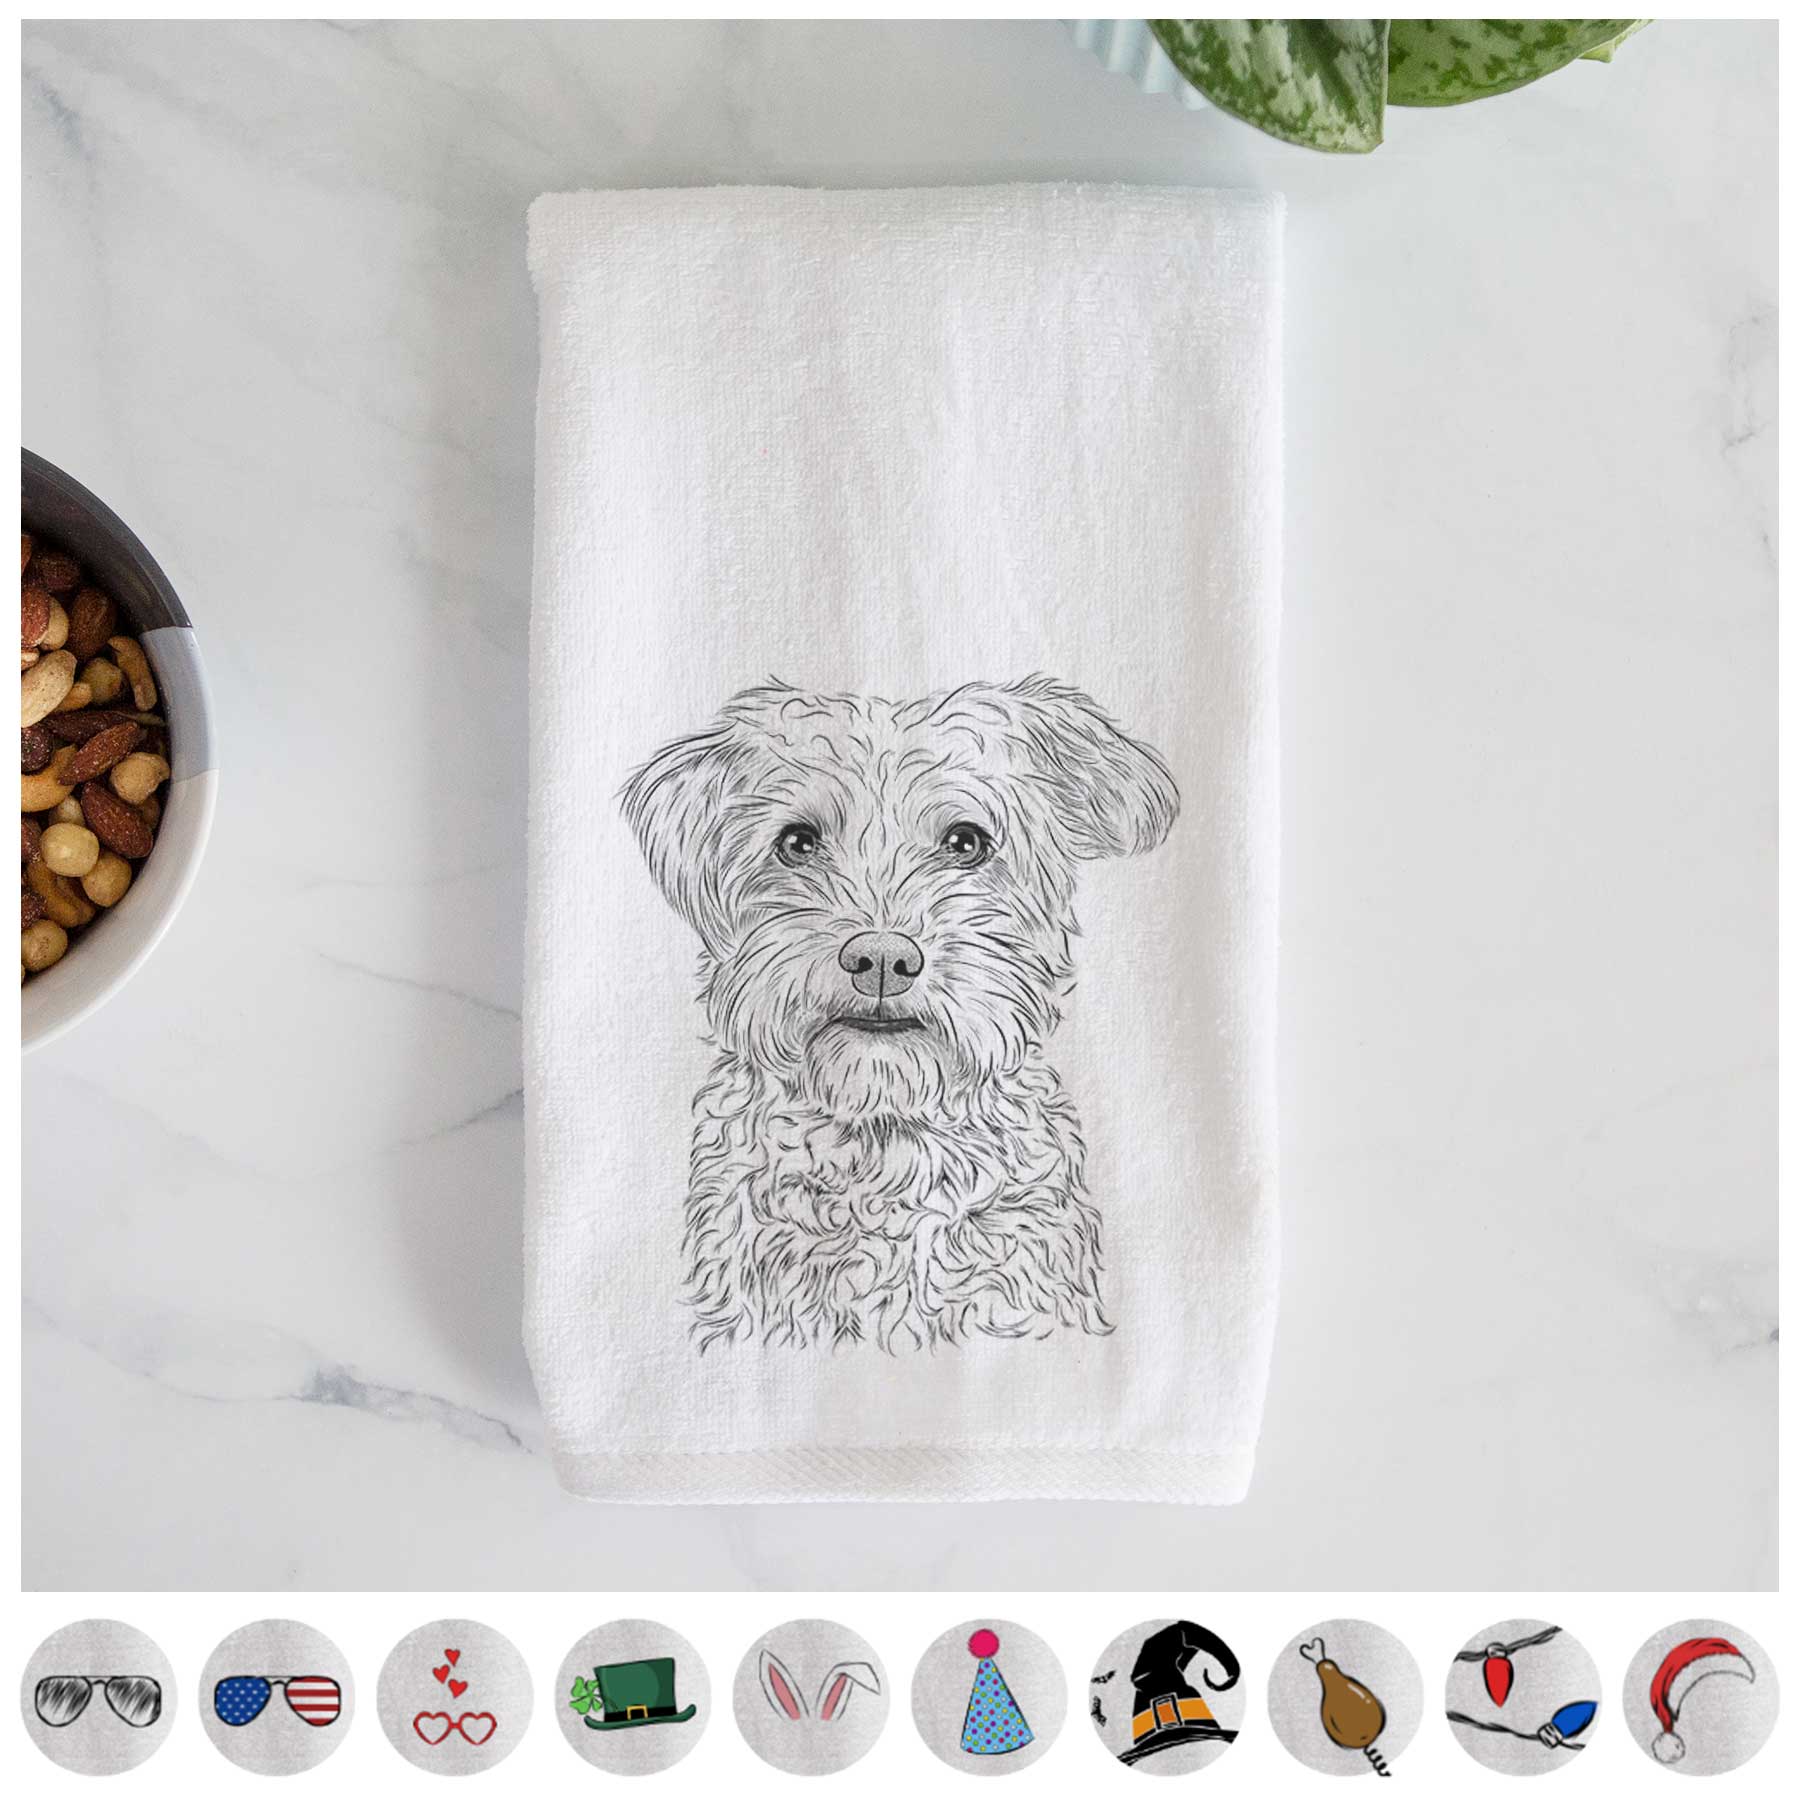 Rudy the Schnoodle Hand Towel